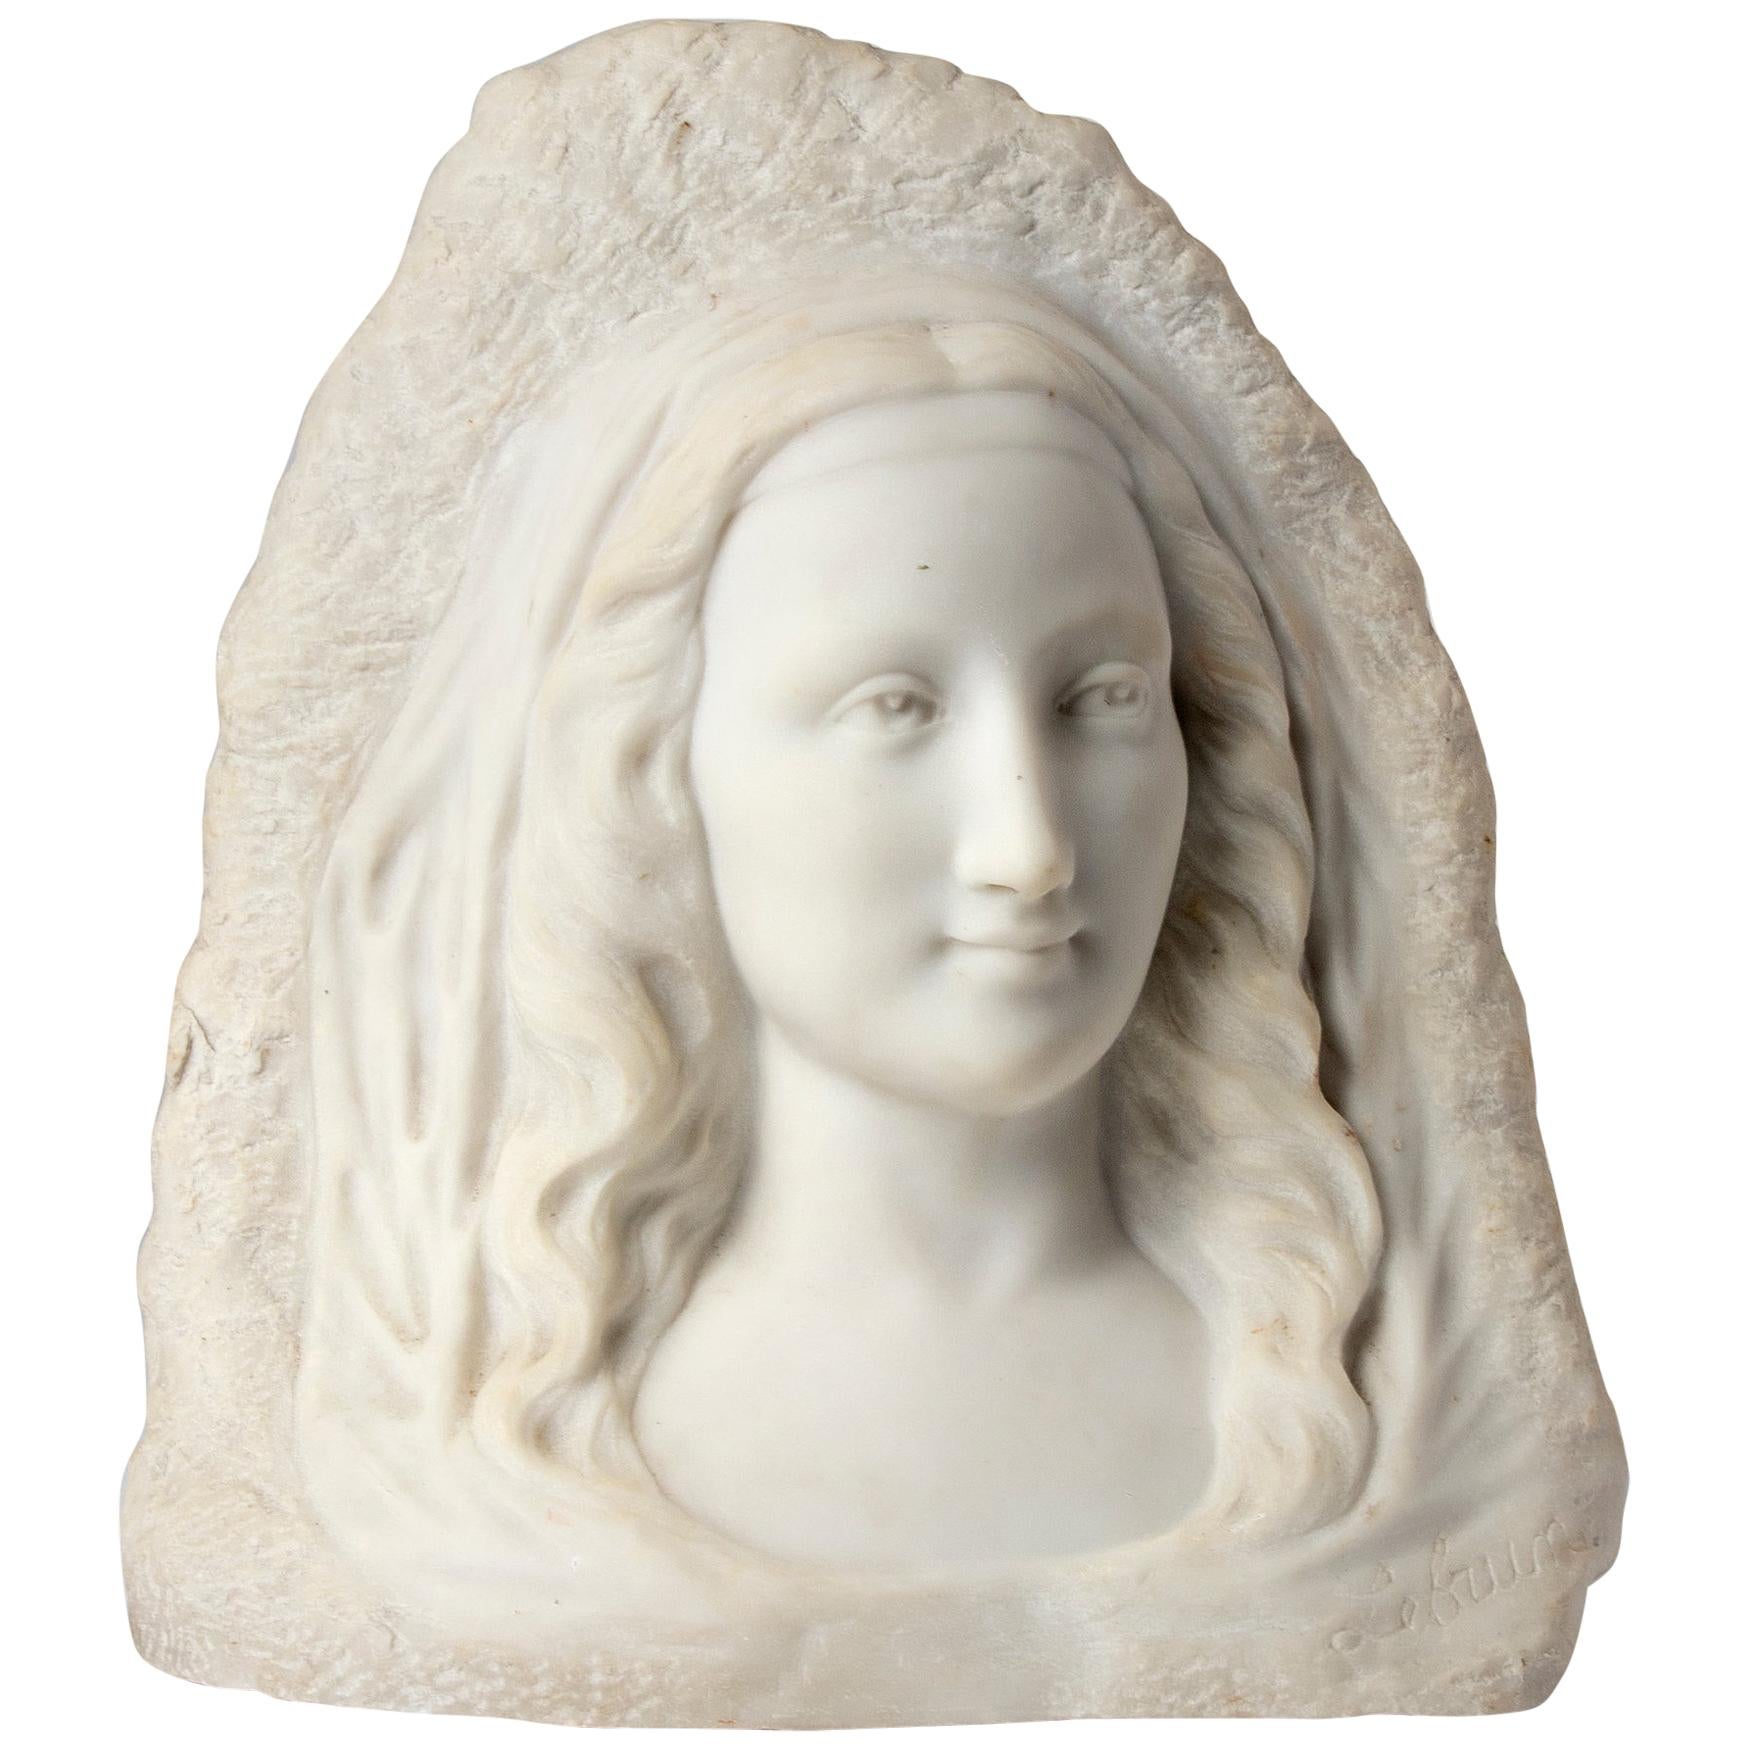 French 19th Century Carrara Marble Sculpture Portrait of Woman, Signed LeBrun For Sale